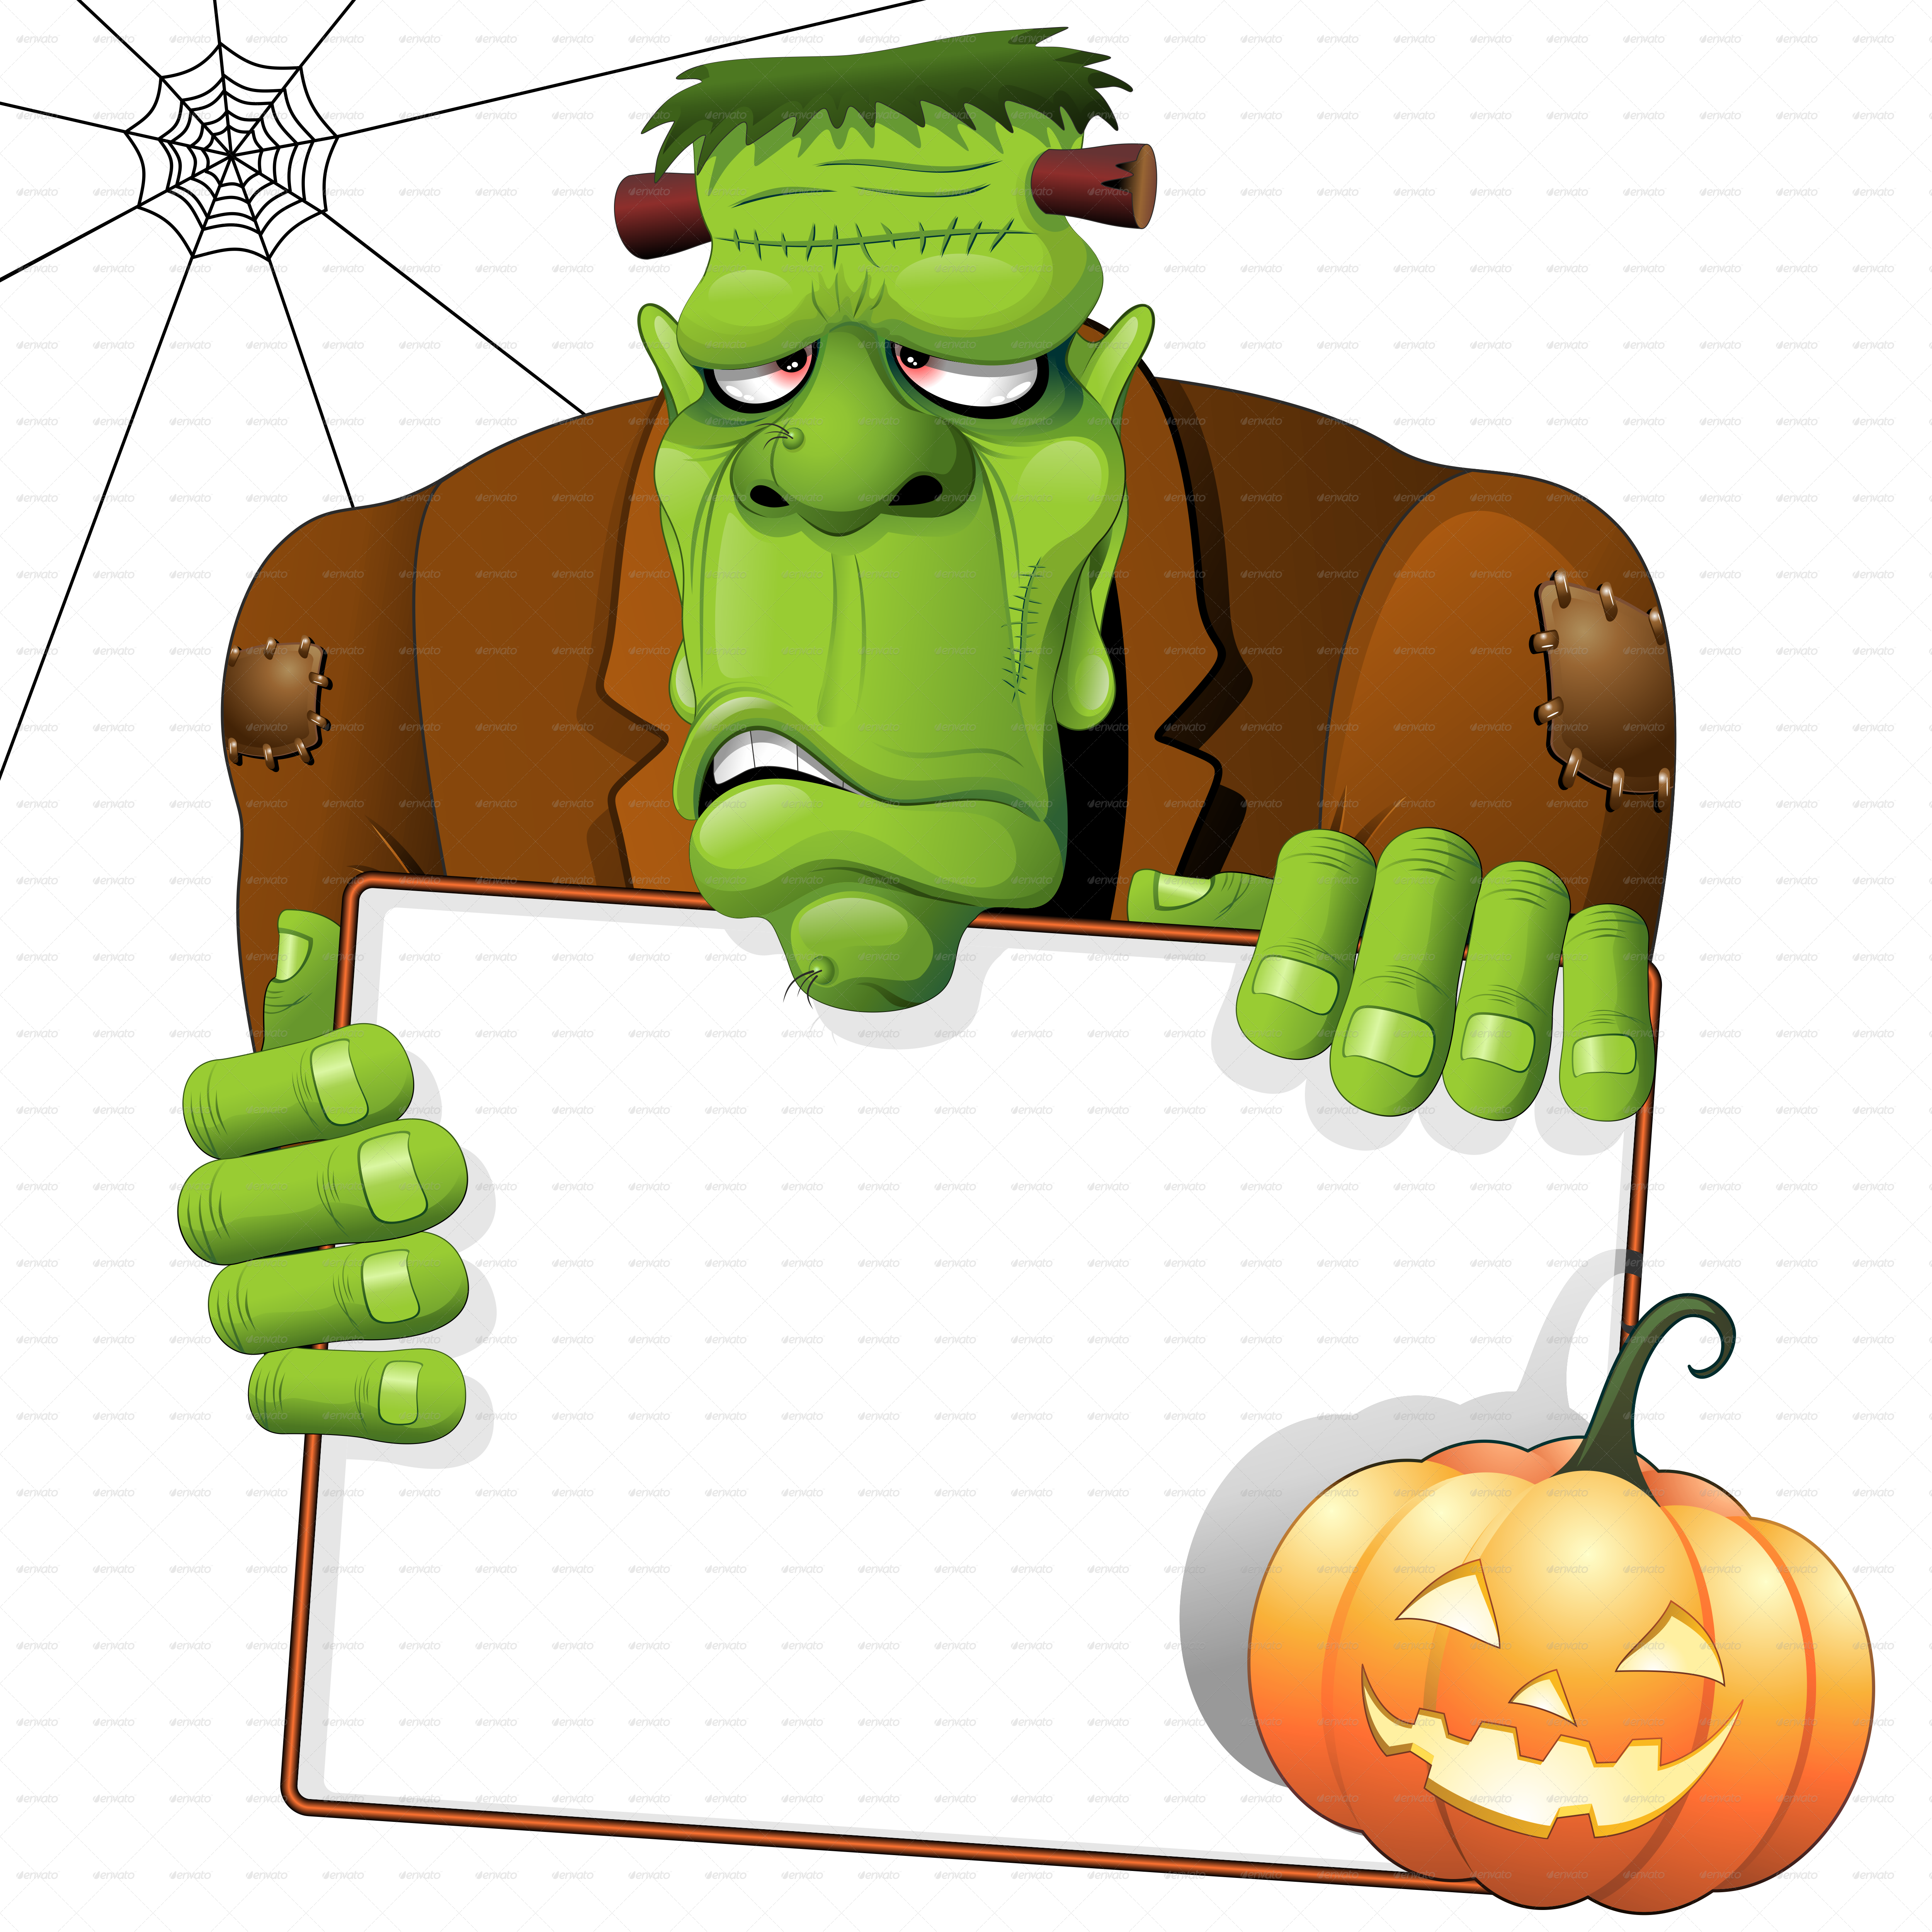 Frankenstein clipart item. Free on dumielauxepices net